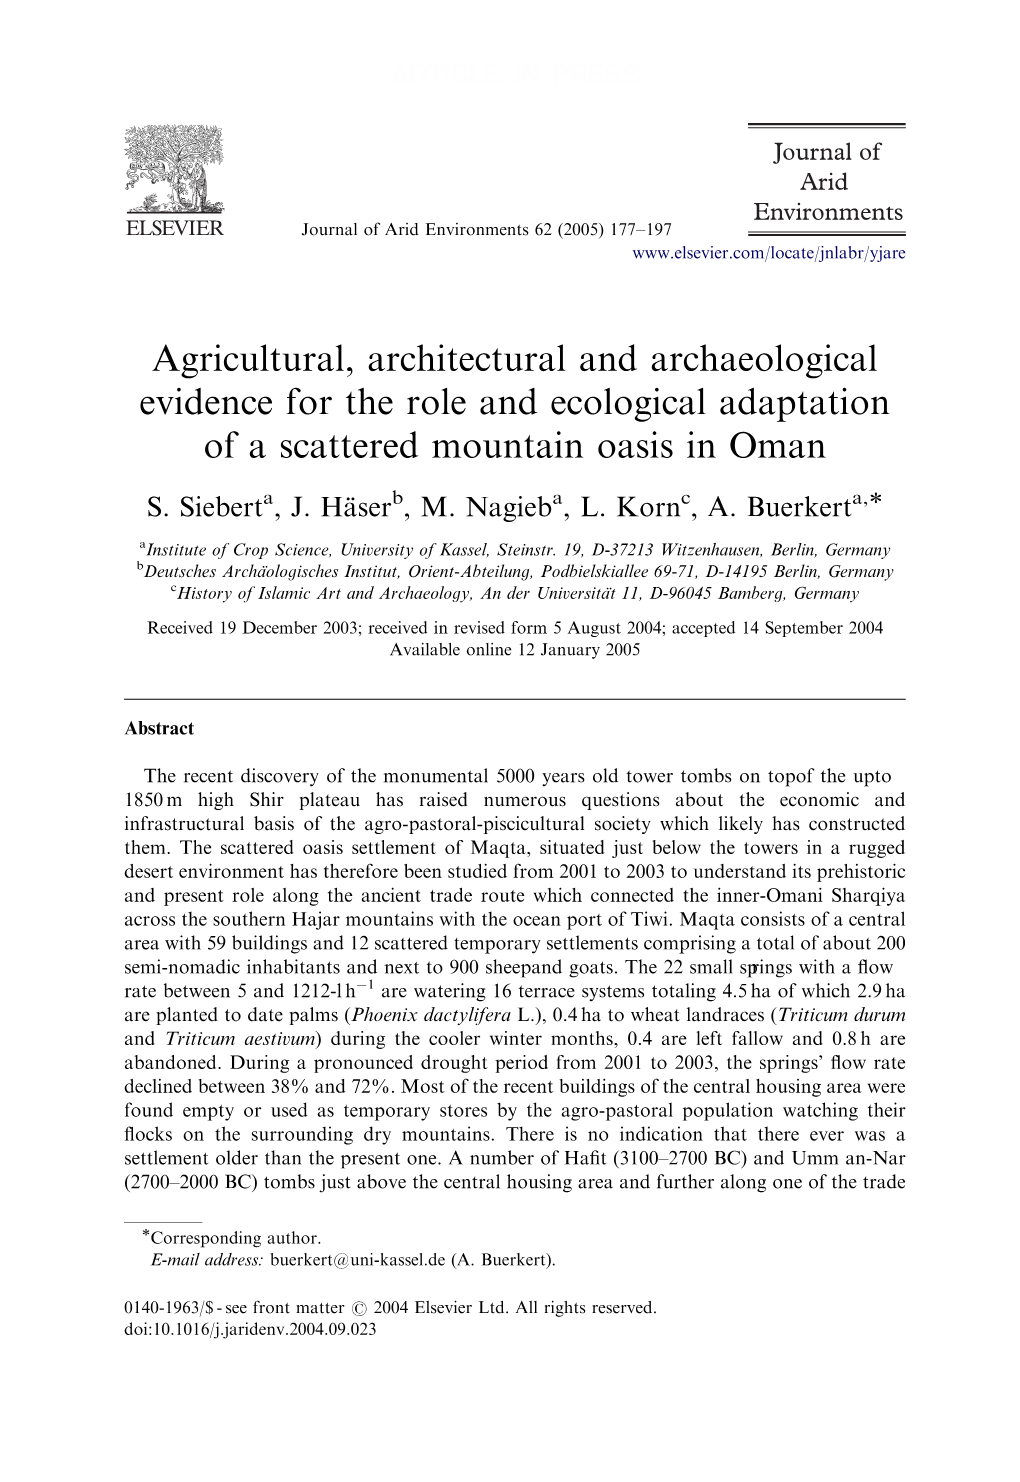 Agricultural, Architectural and Archaeological Evidence for the Role and Ecological Adaptation of a Scattered Mountain Oasis in Oman